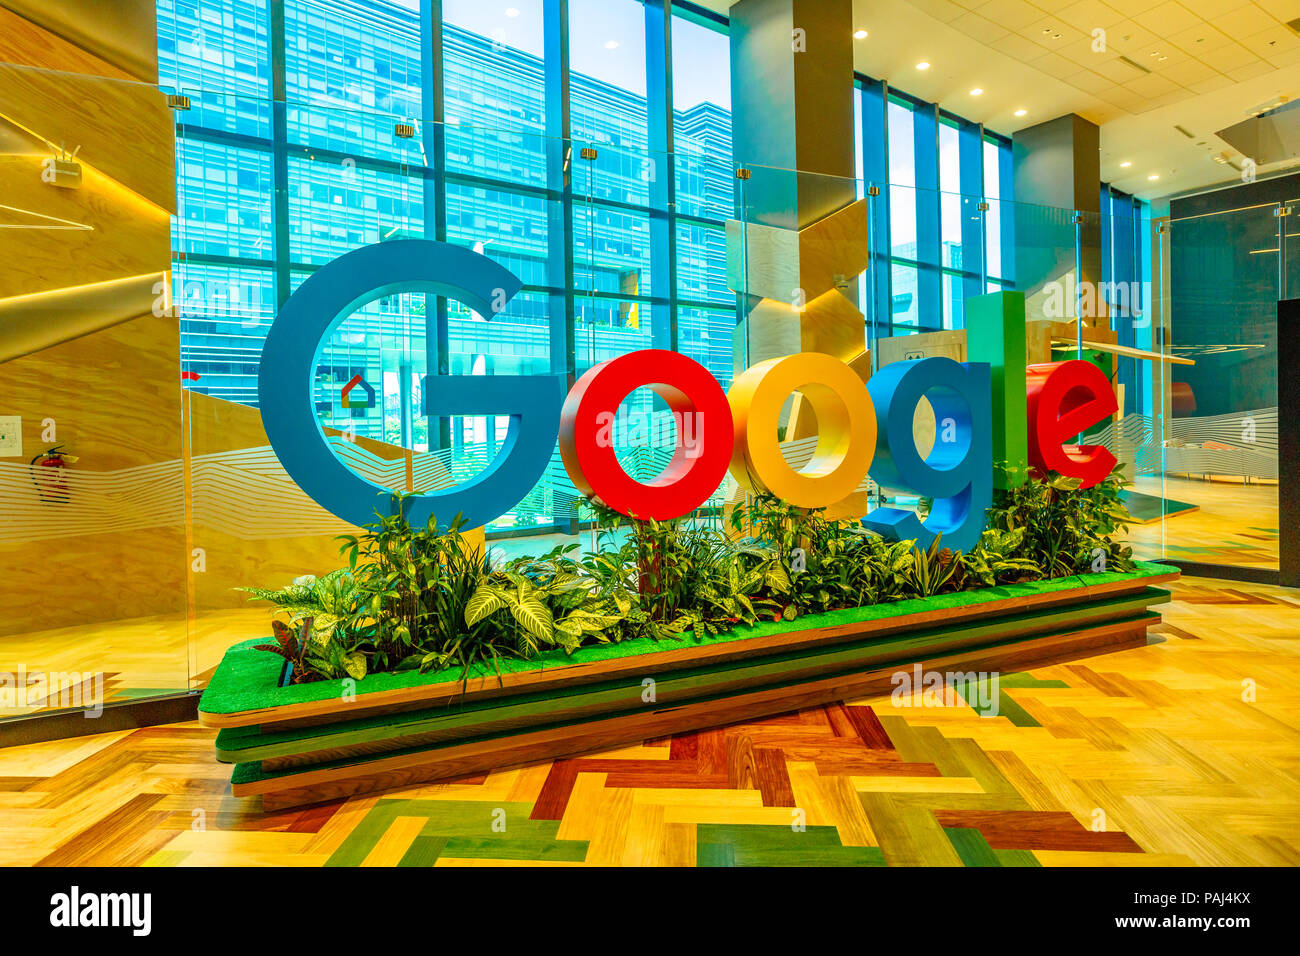 Singapore - May 5, 2018: closeup of Google sign inside a new office to house fast growing team of engineers in Singapore. Google's Asia-Pacific Headquarters con employs 1000 people. Stock Photo